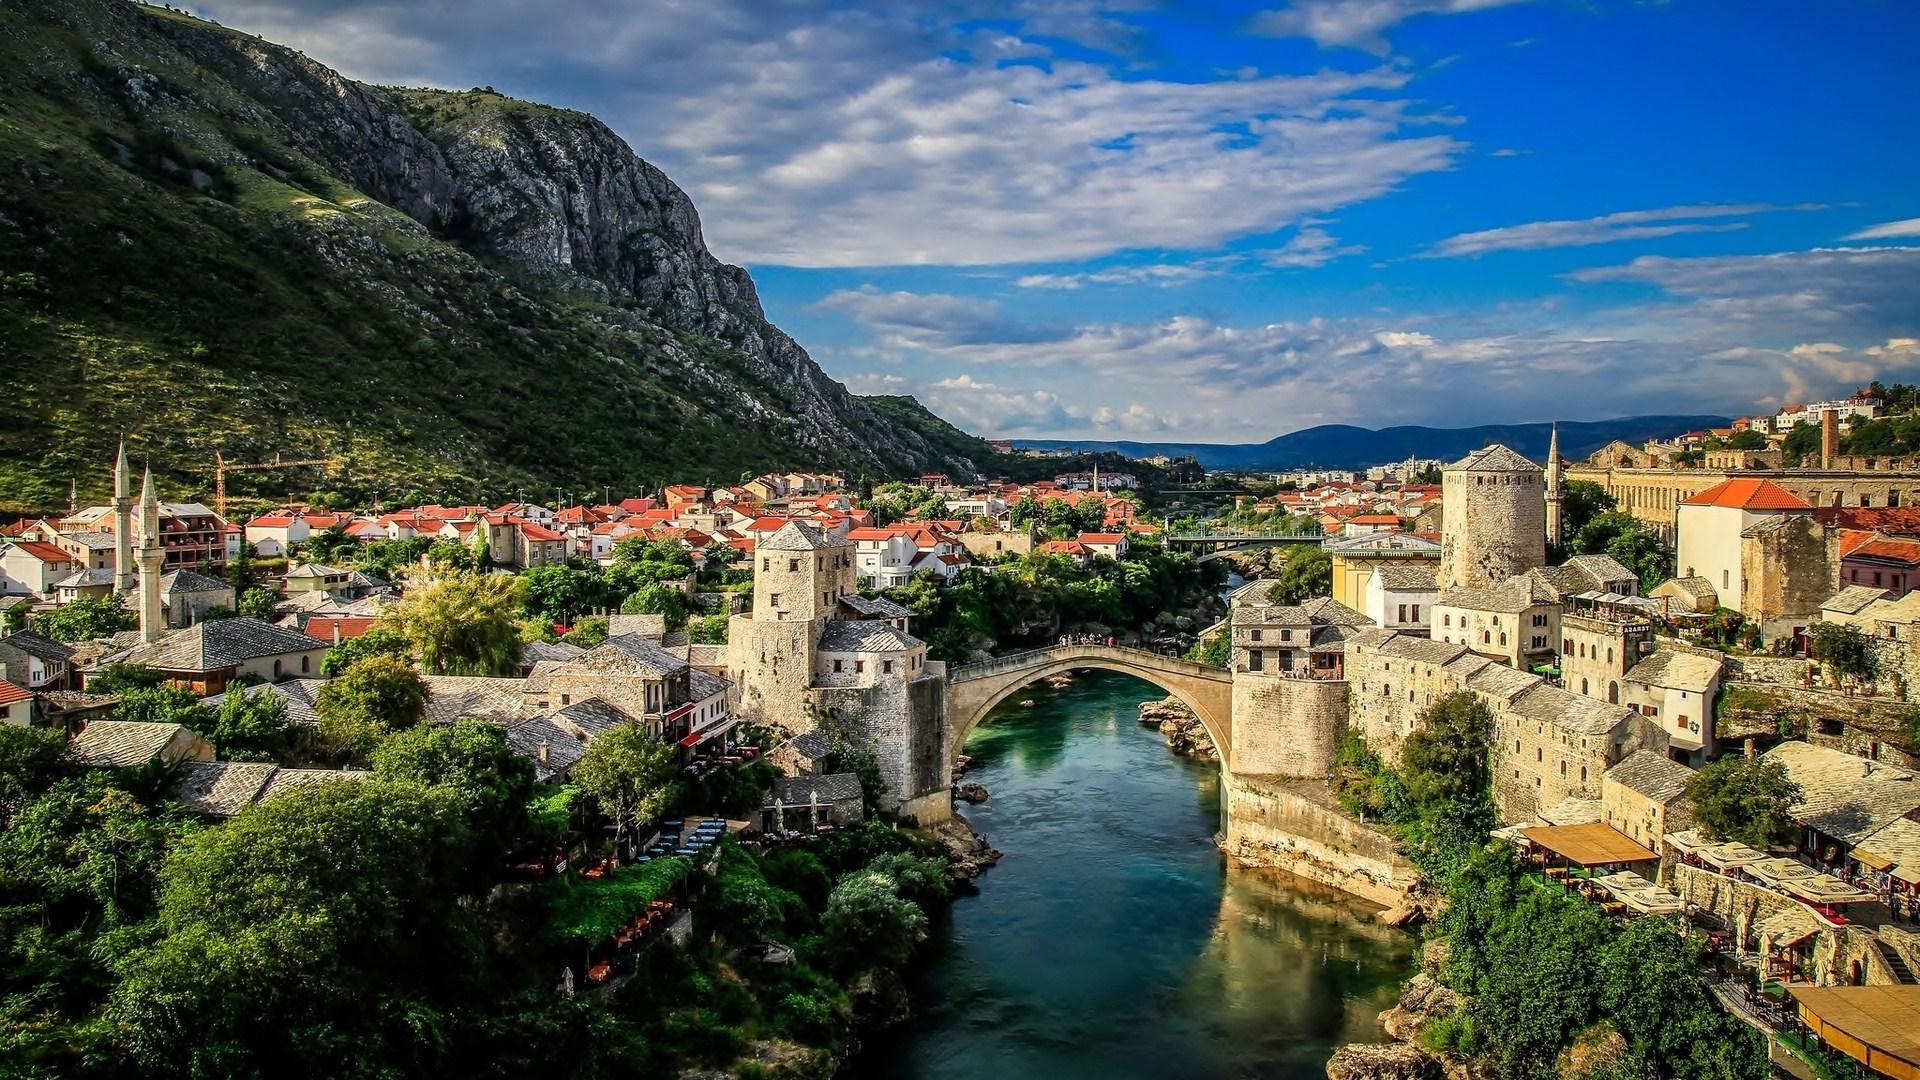 Images of Mostar | 1920x1080